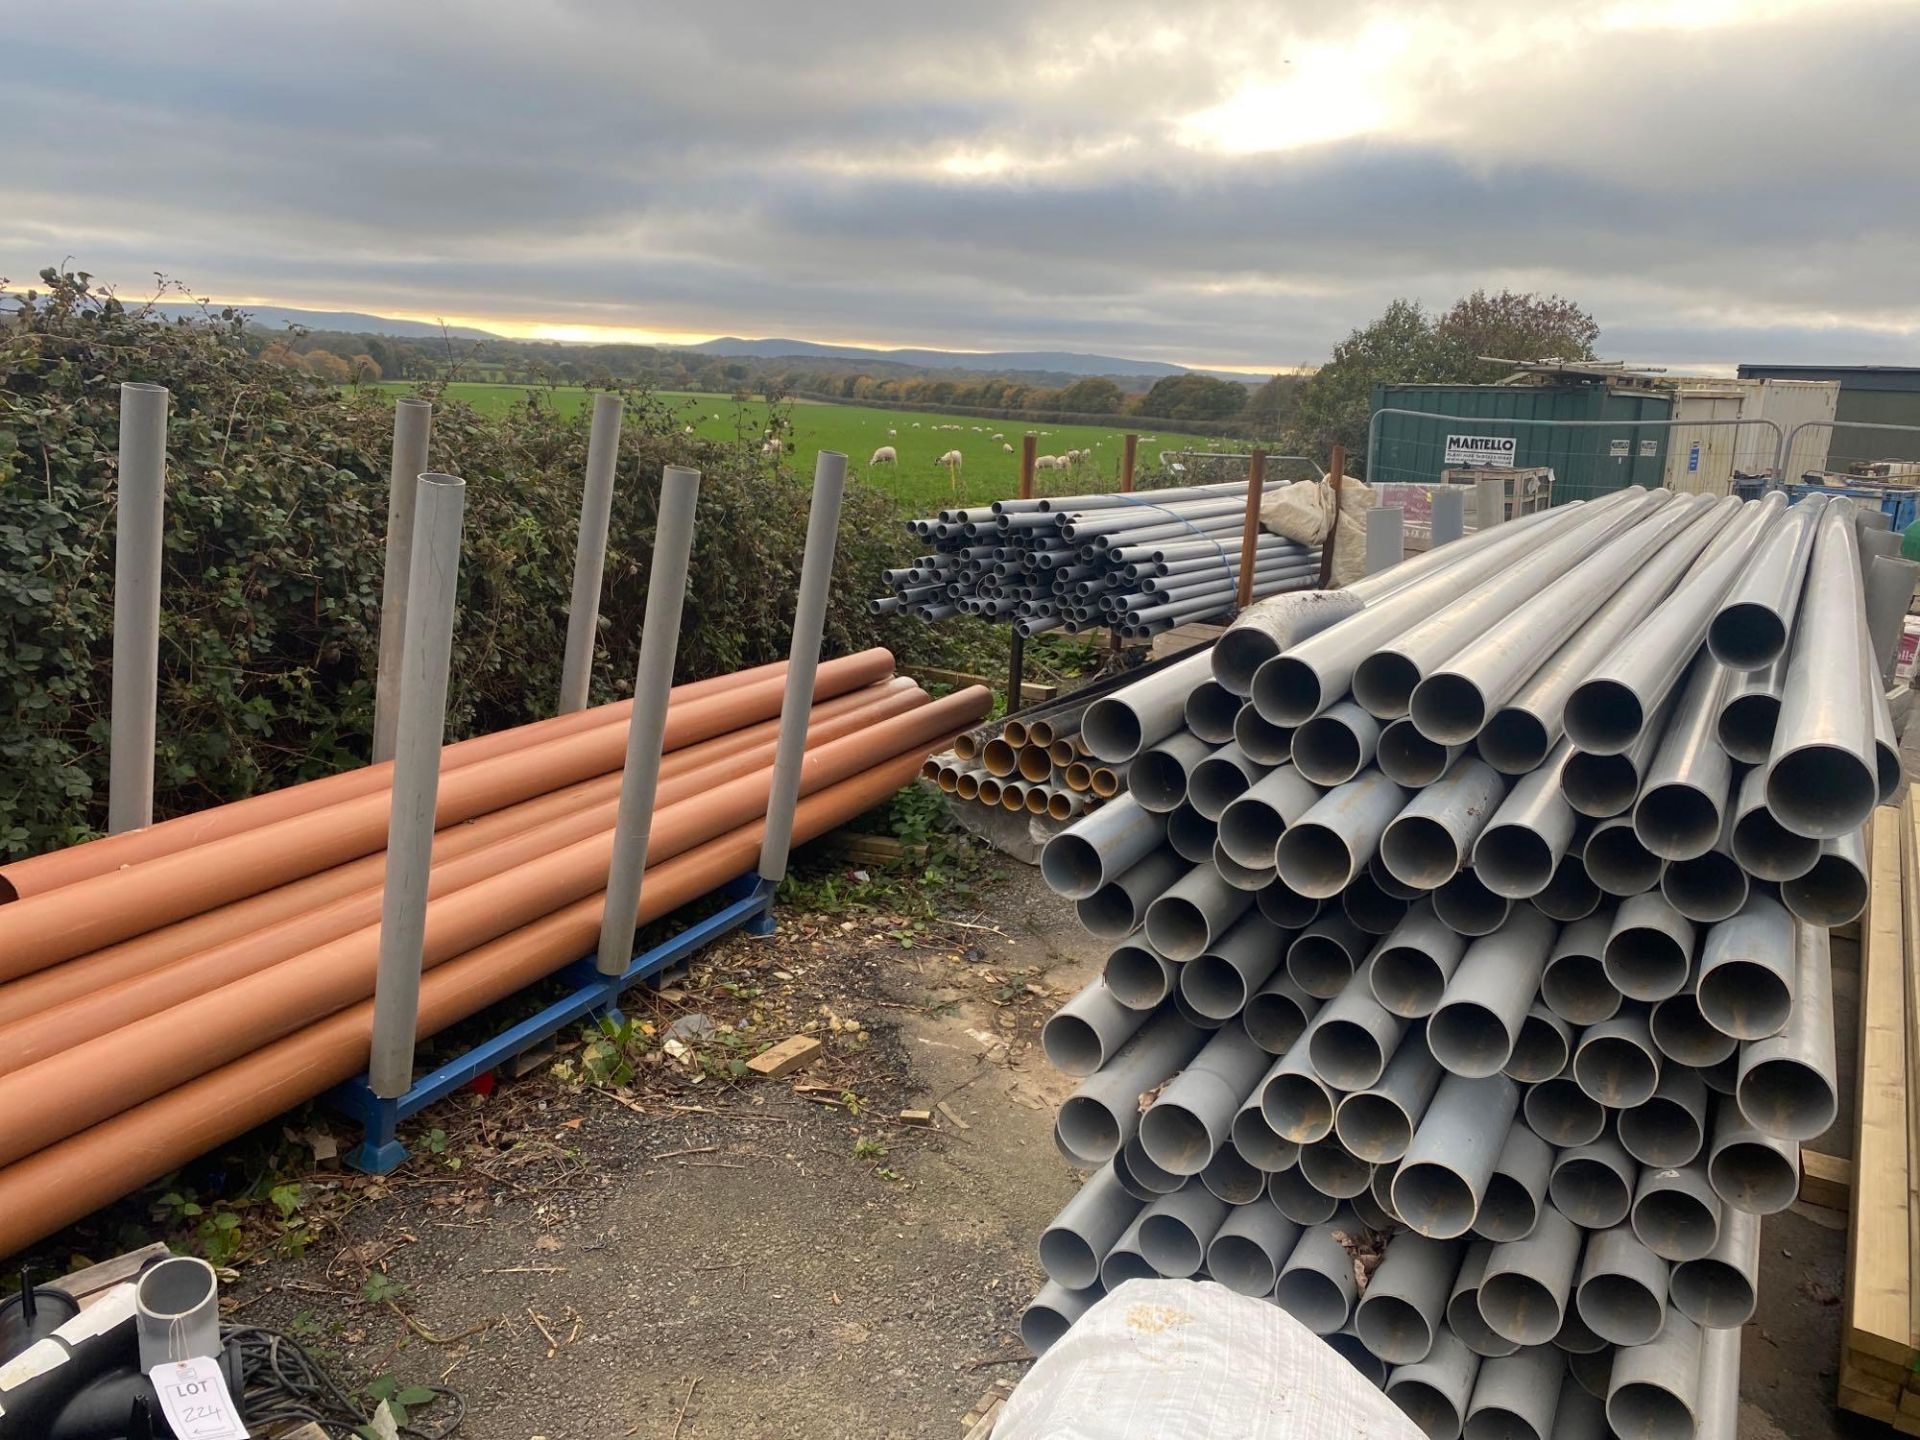 3 stillages and 1 create comprising a large quantity of BT and waste pipe various lengths and sizes